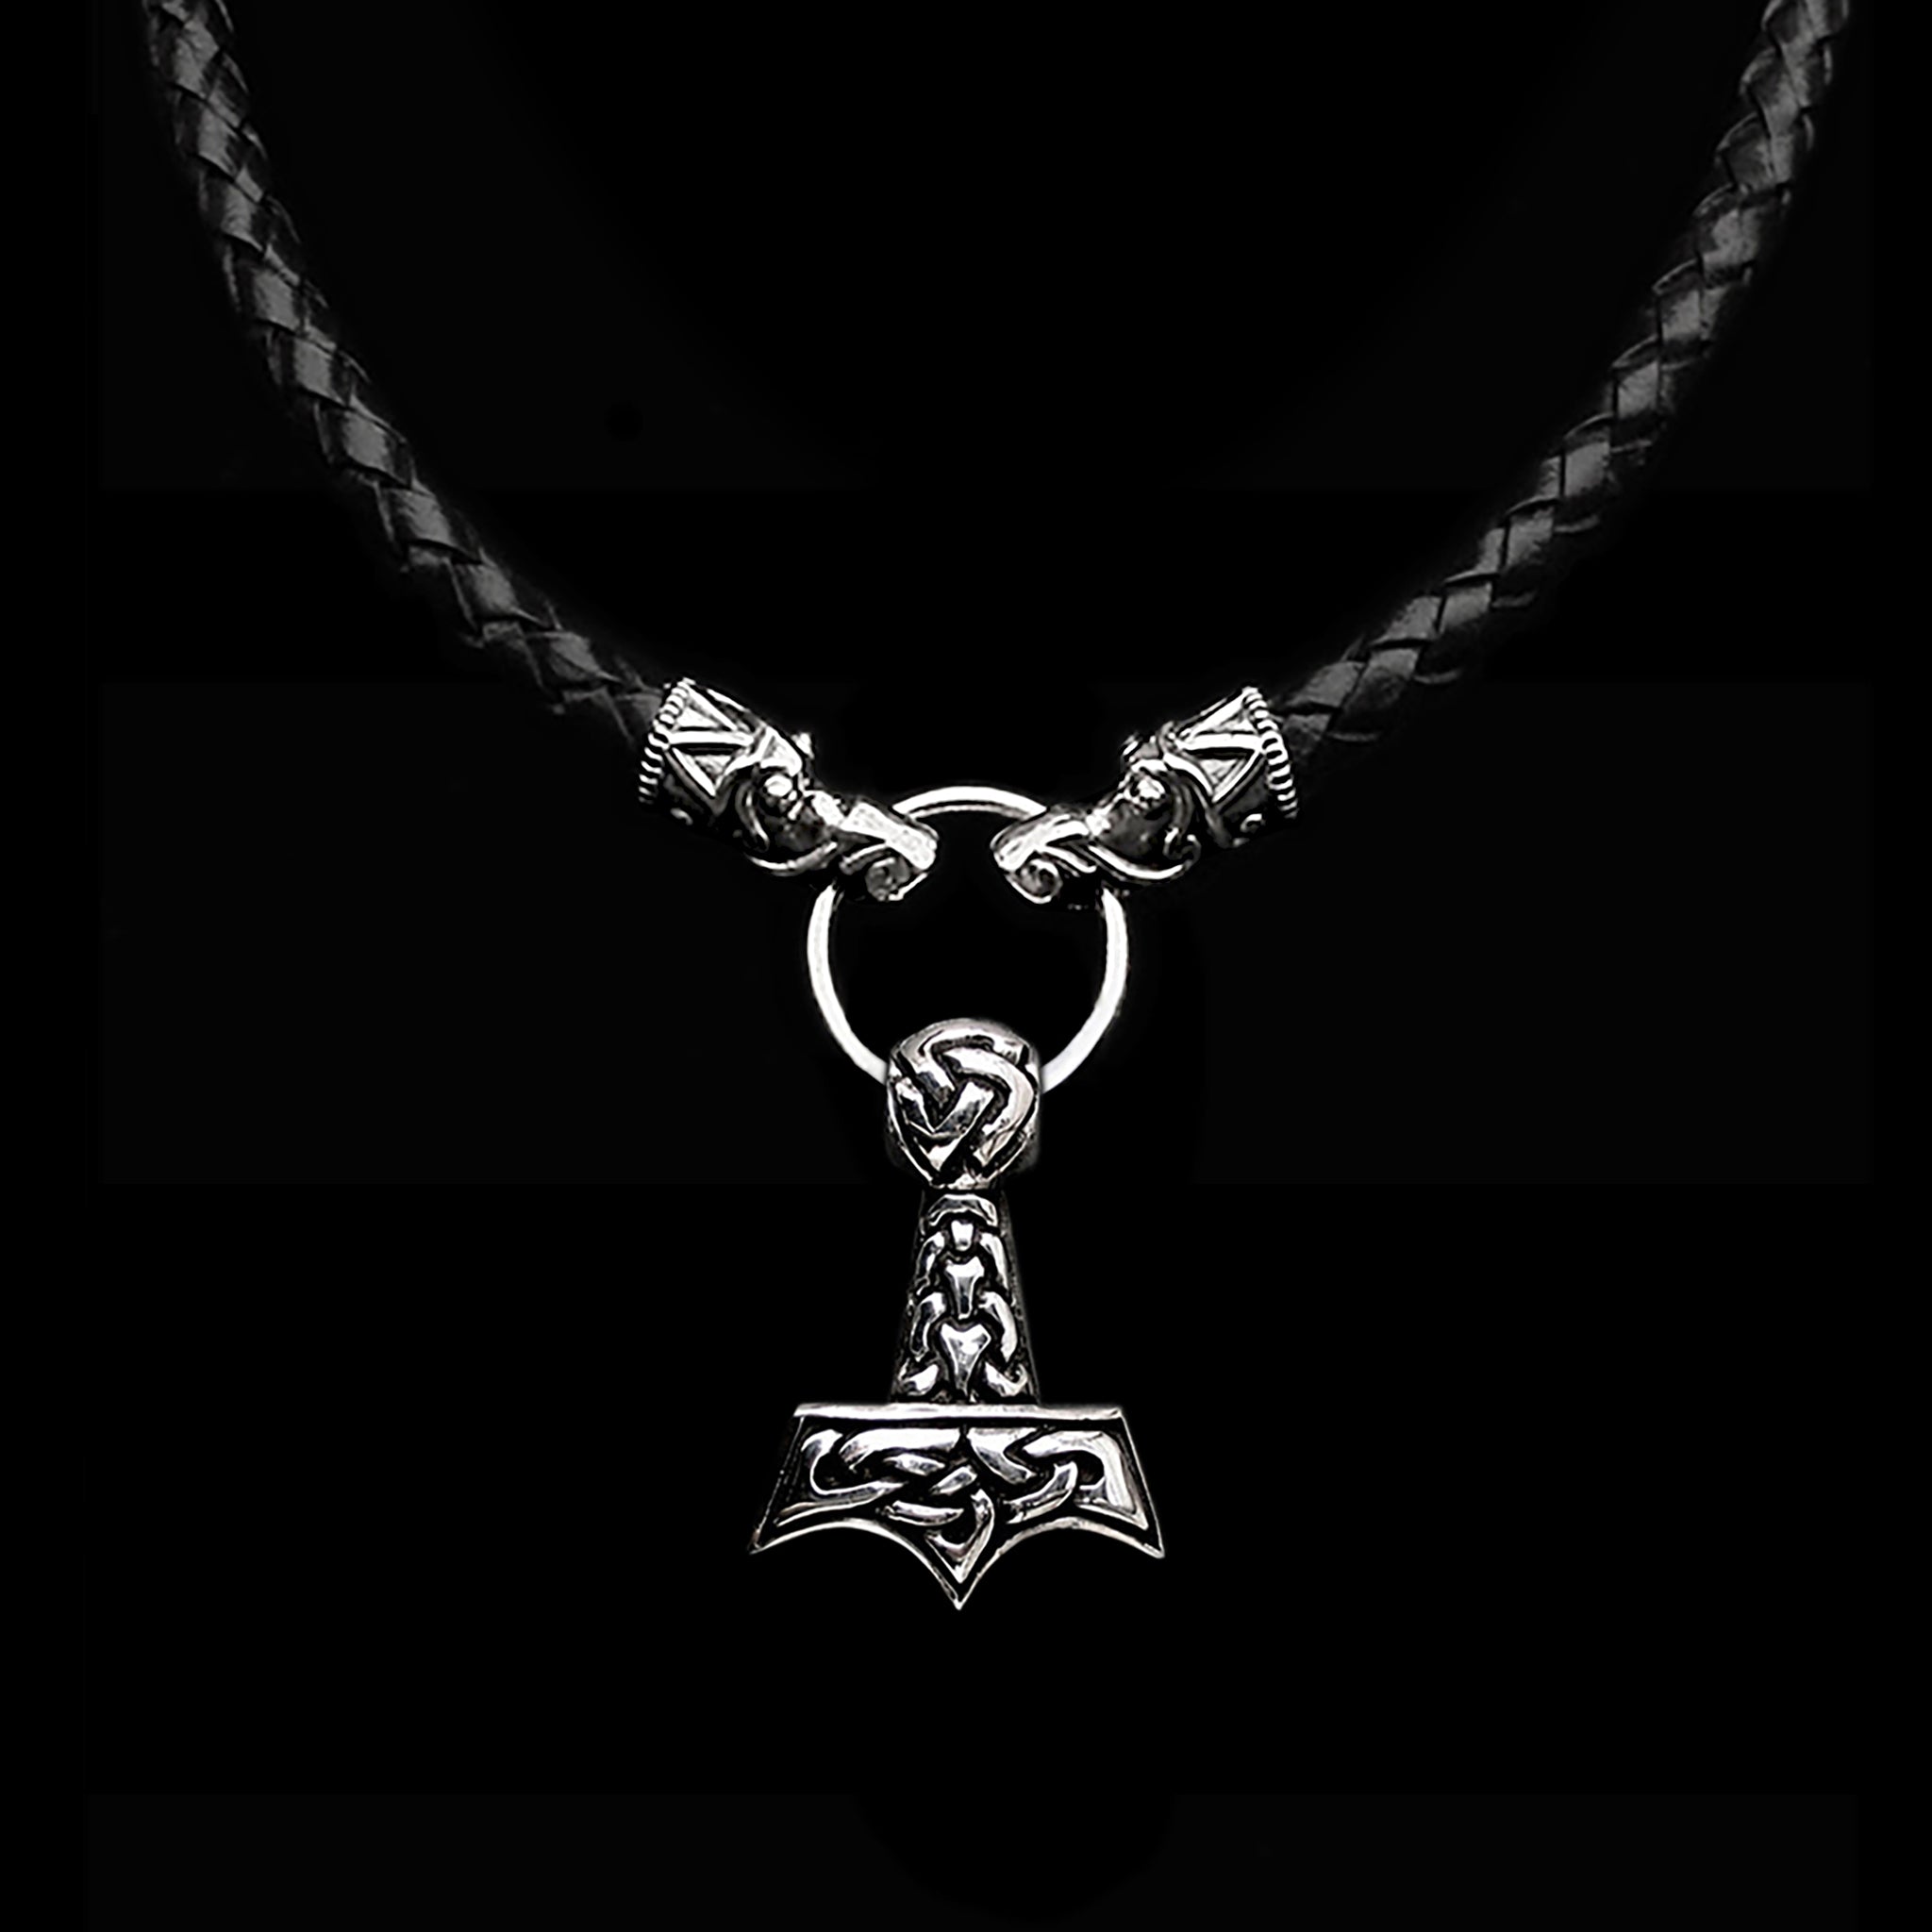 Customisable 8mm Thick Braided Leather Thors Hammer Necklace with Silver Gotland Dragon Heads, Split Ring and AD2 Knotwork Thor's Hammer